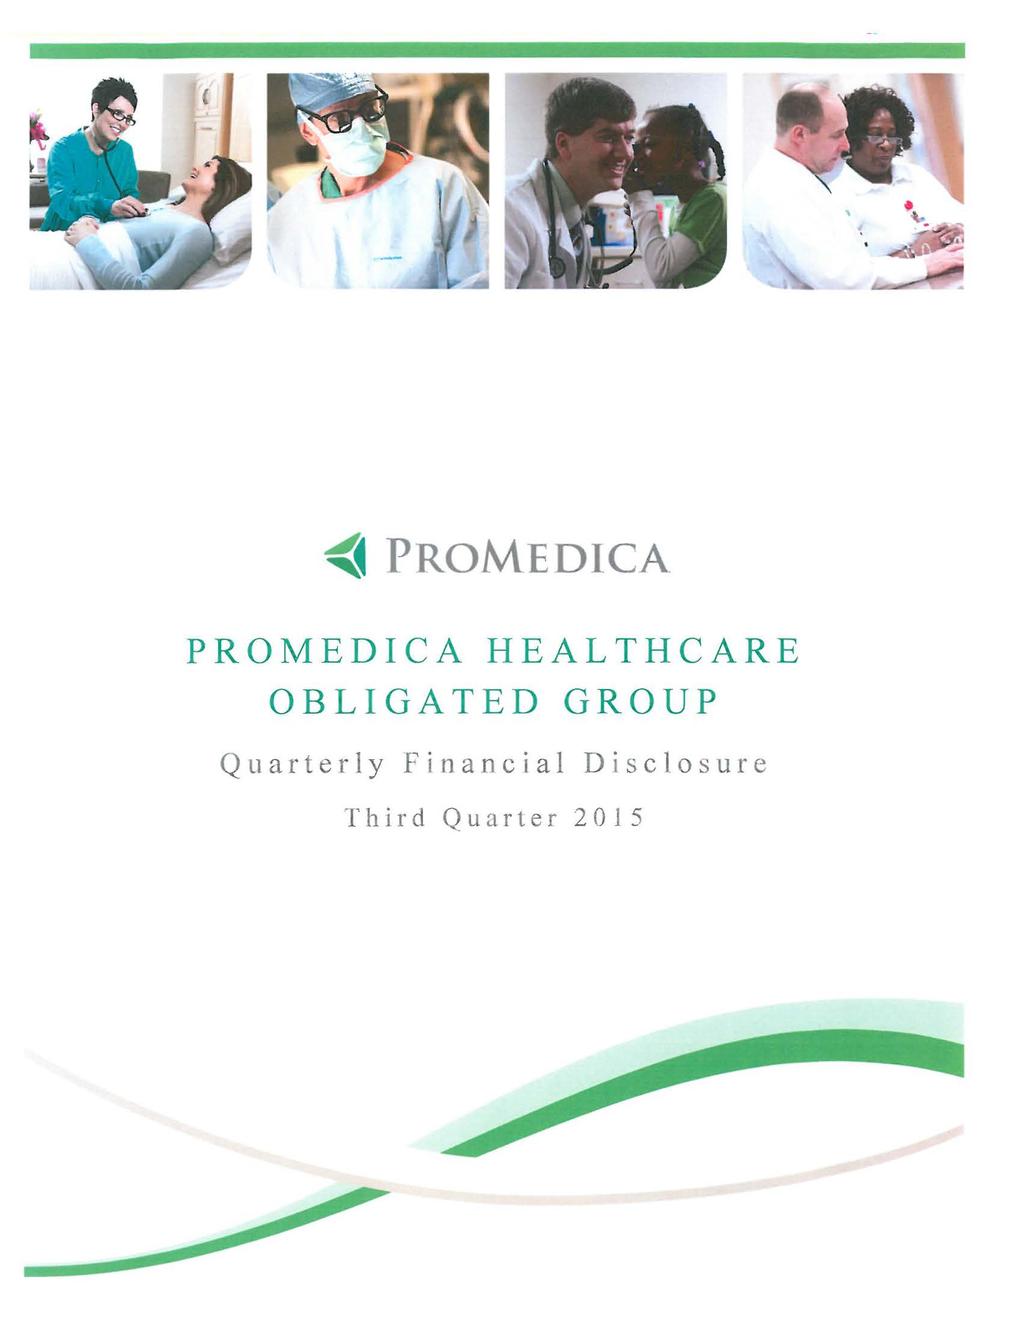 PROMEDICA HEALTHCARE OBLIGATED GROUP